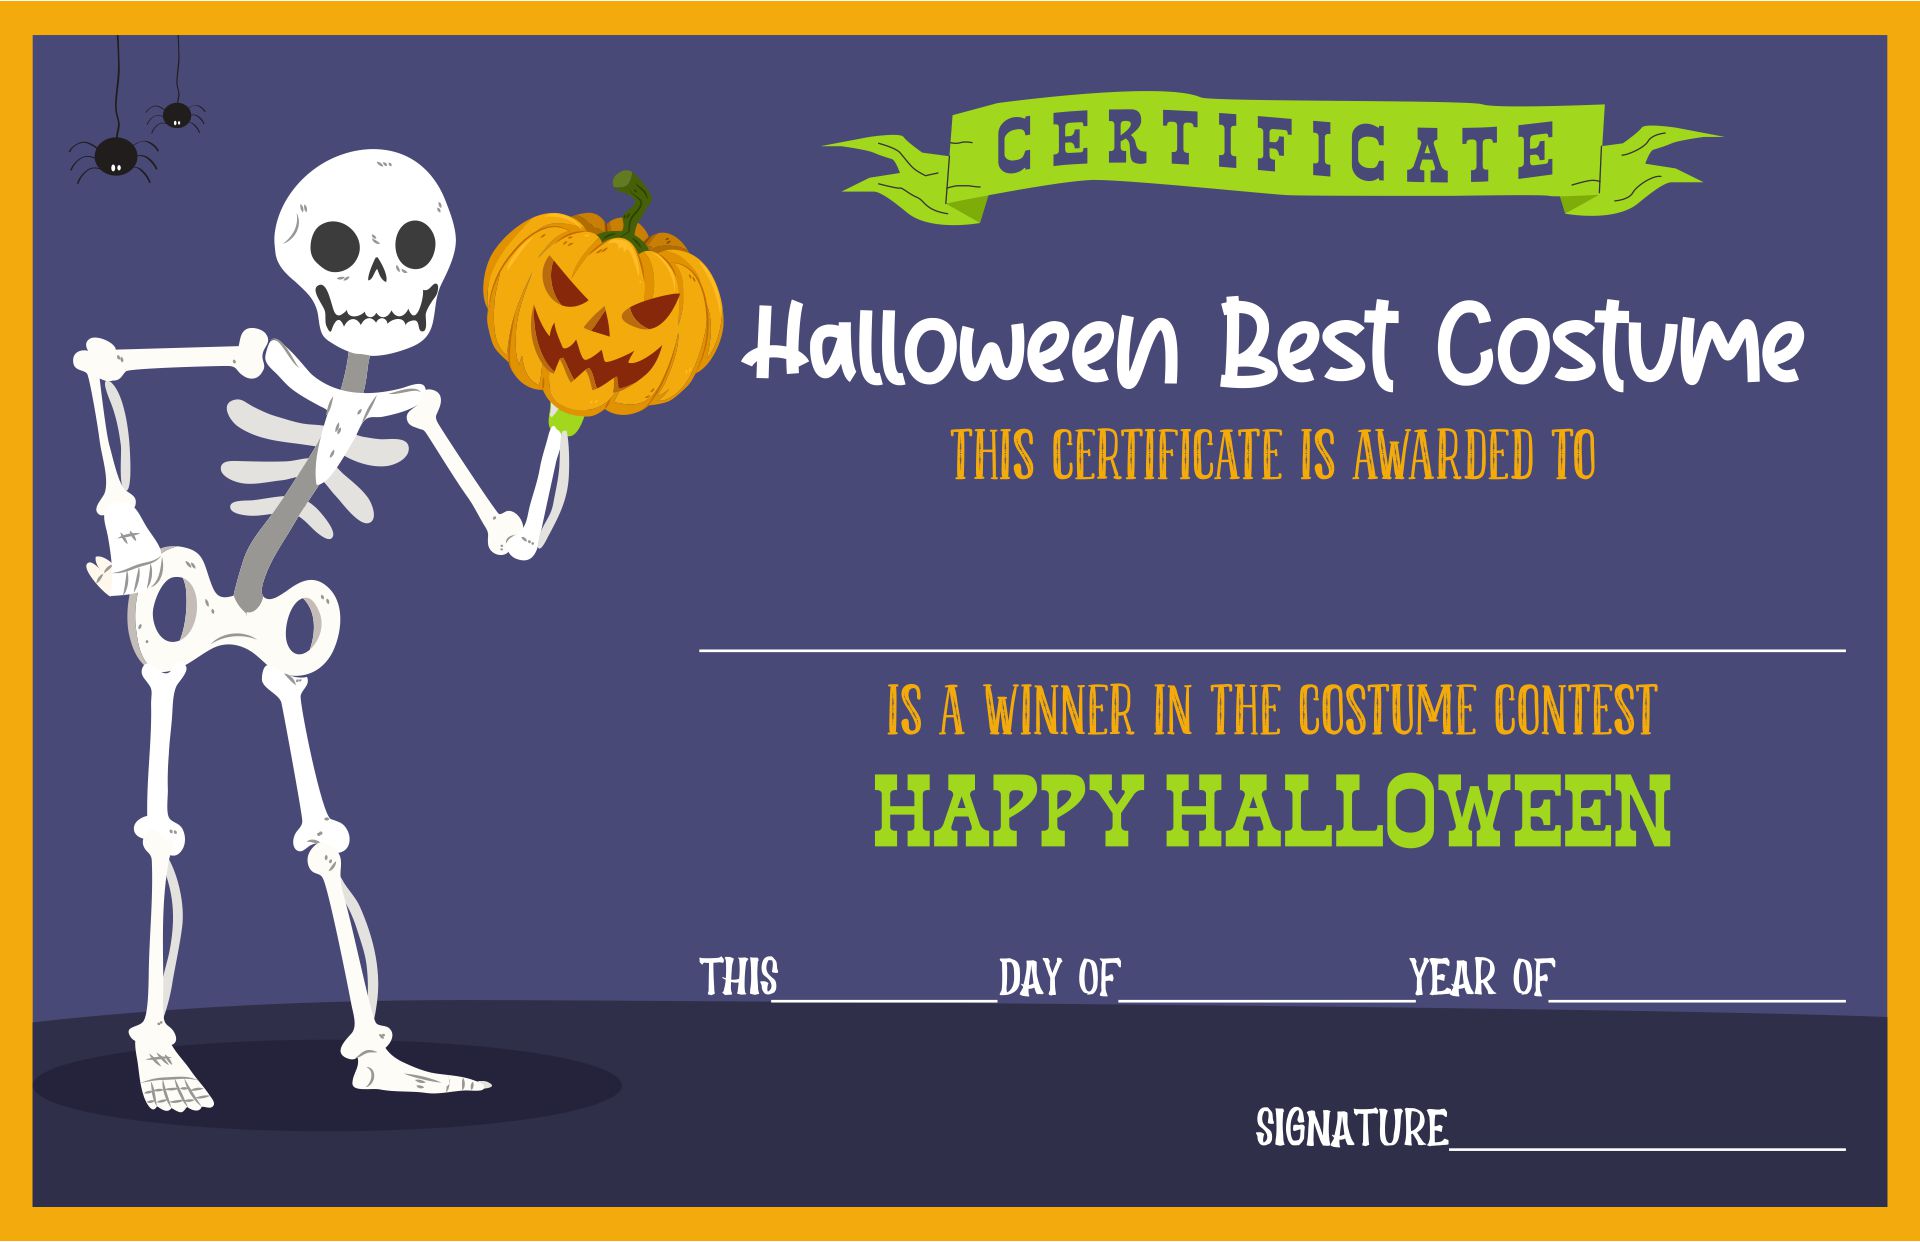 Costume Contest Certificates For Halloween With Clip Art